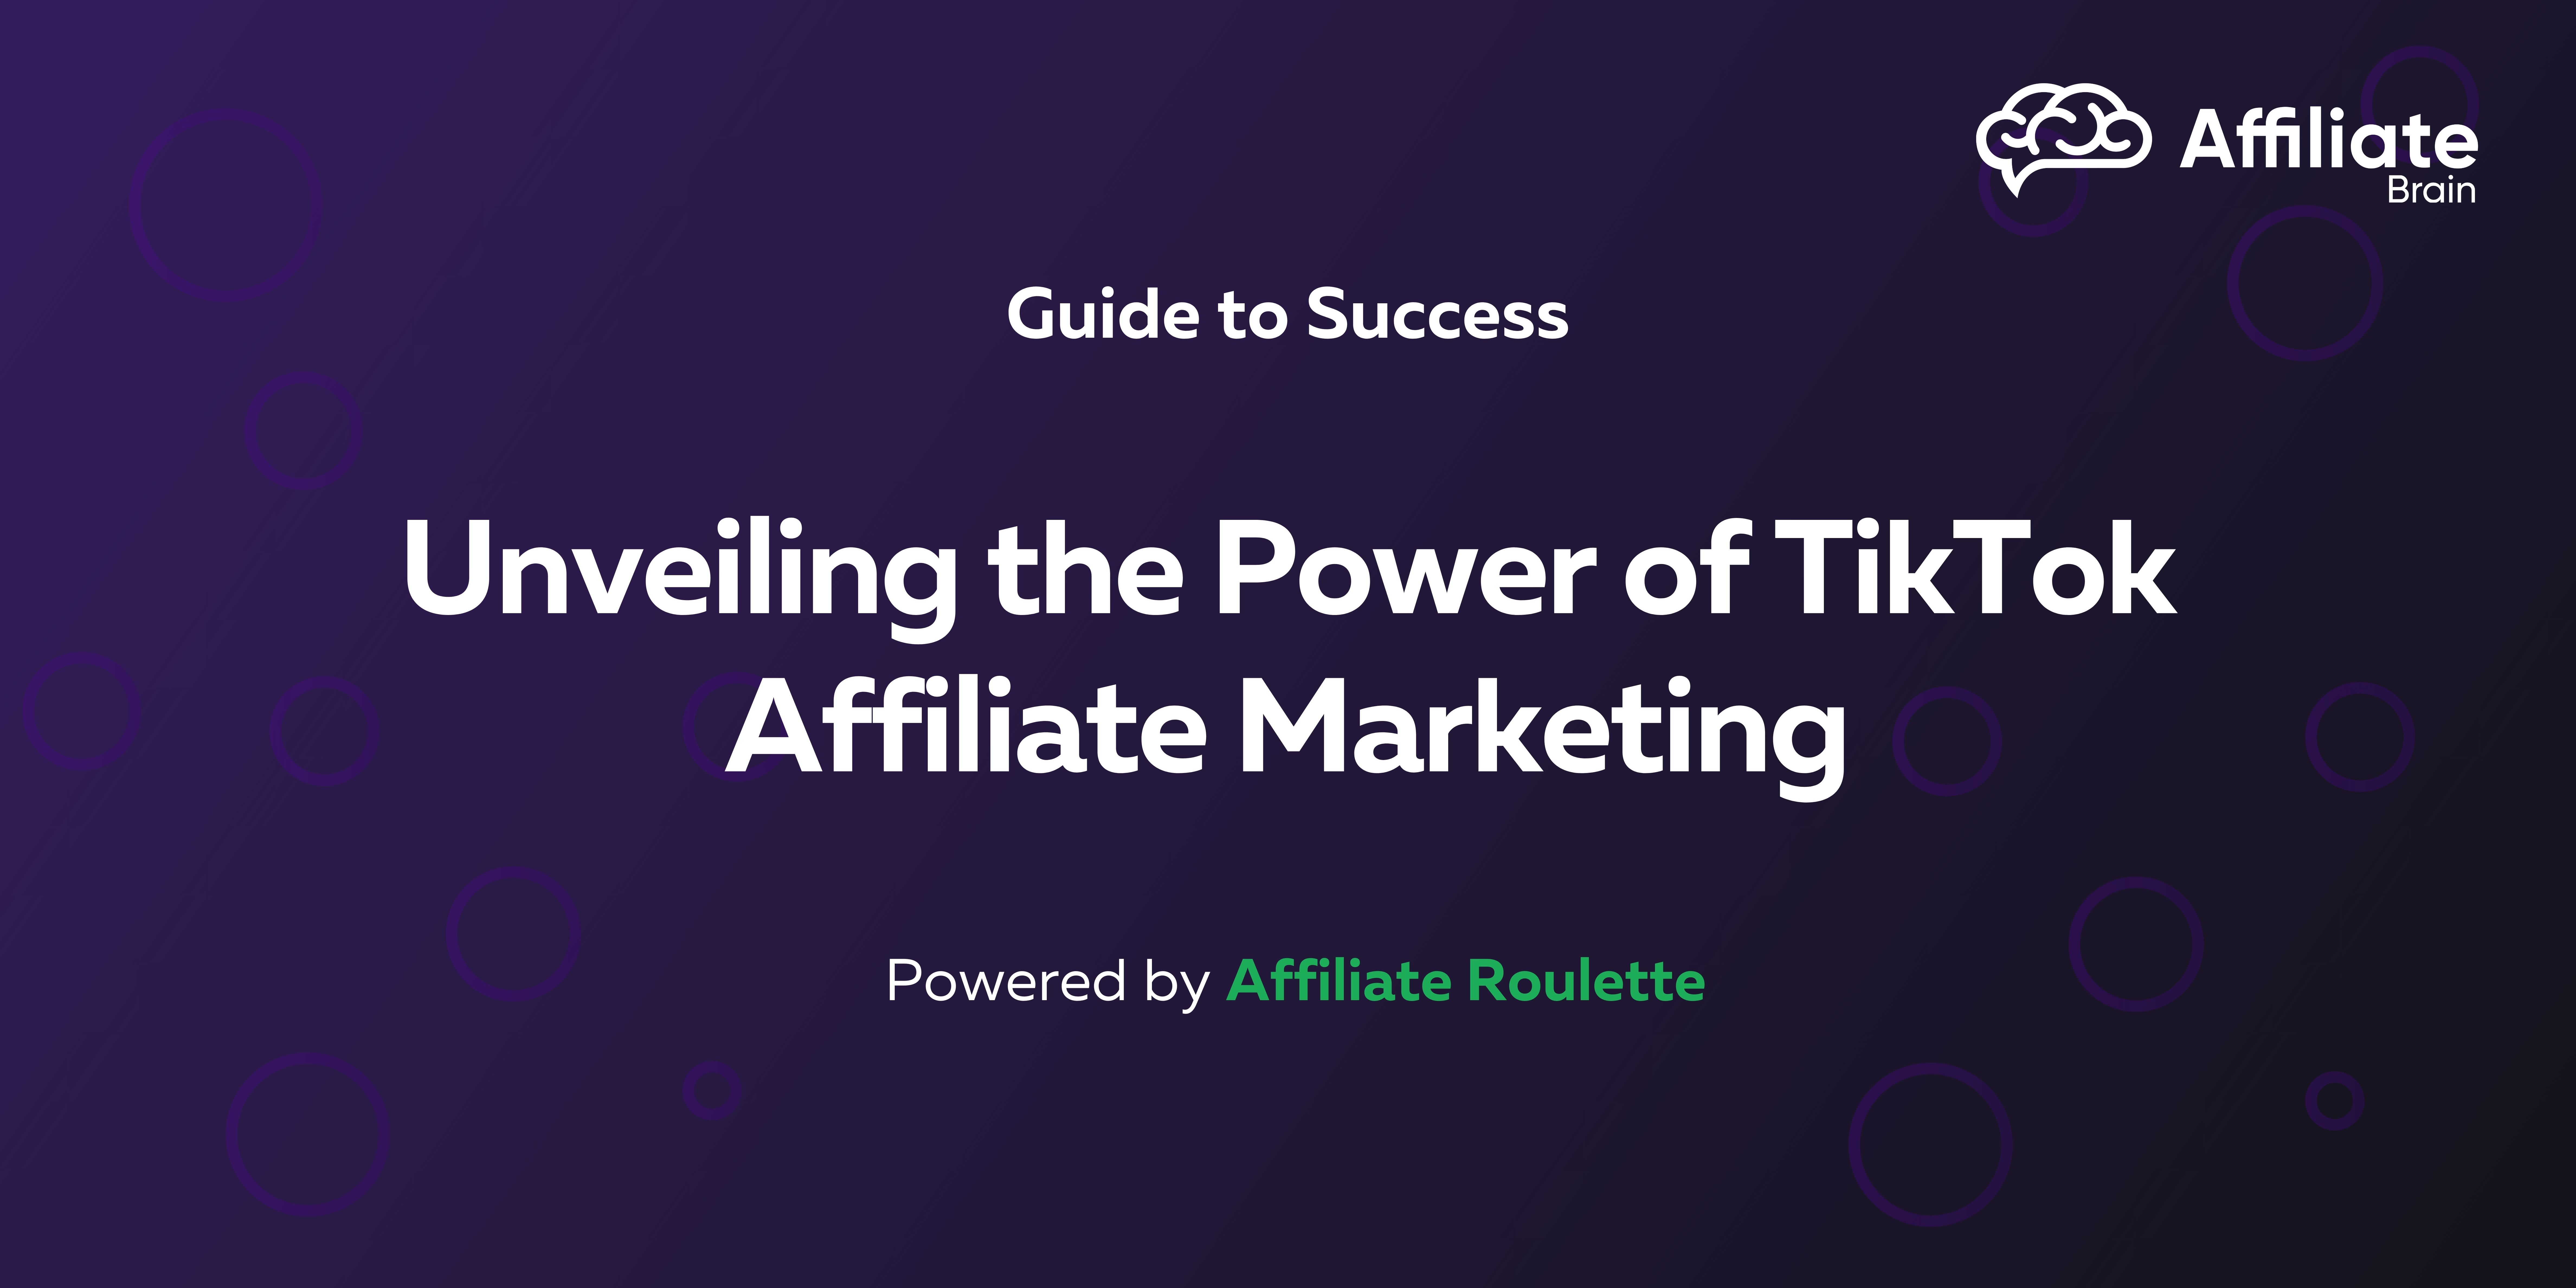 Unveiling the Power of TikTok Affiliate Marketing: Guide to Success